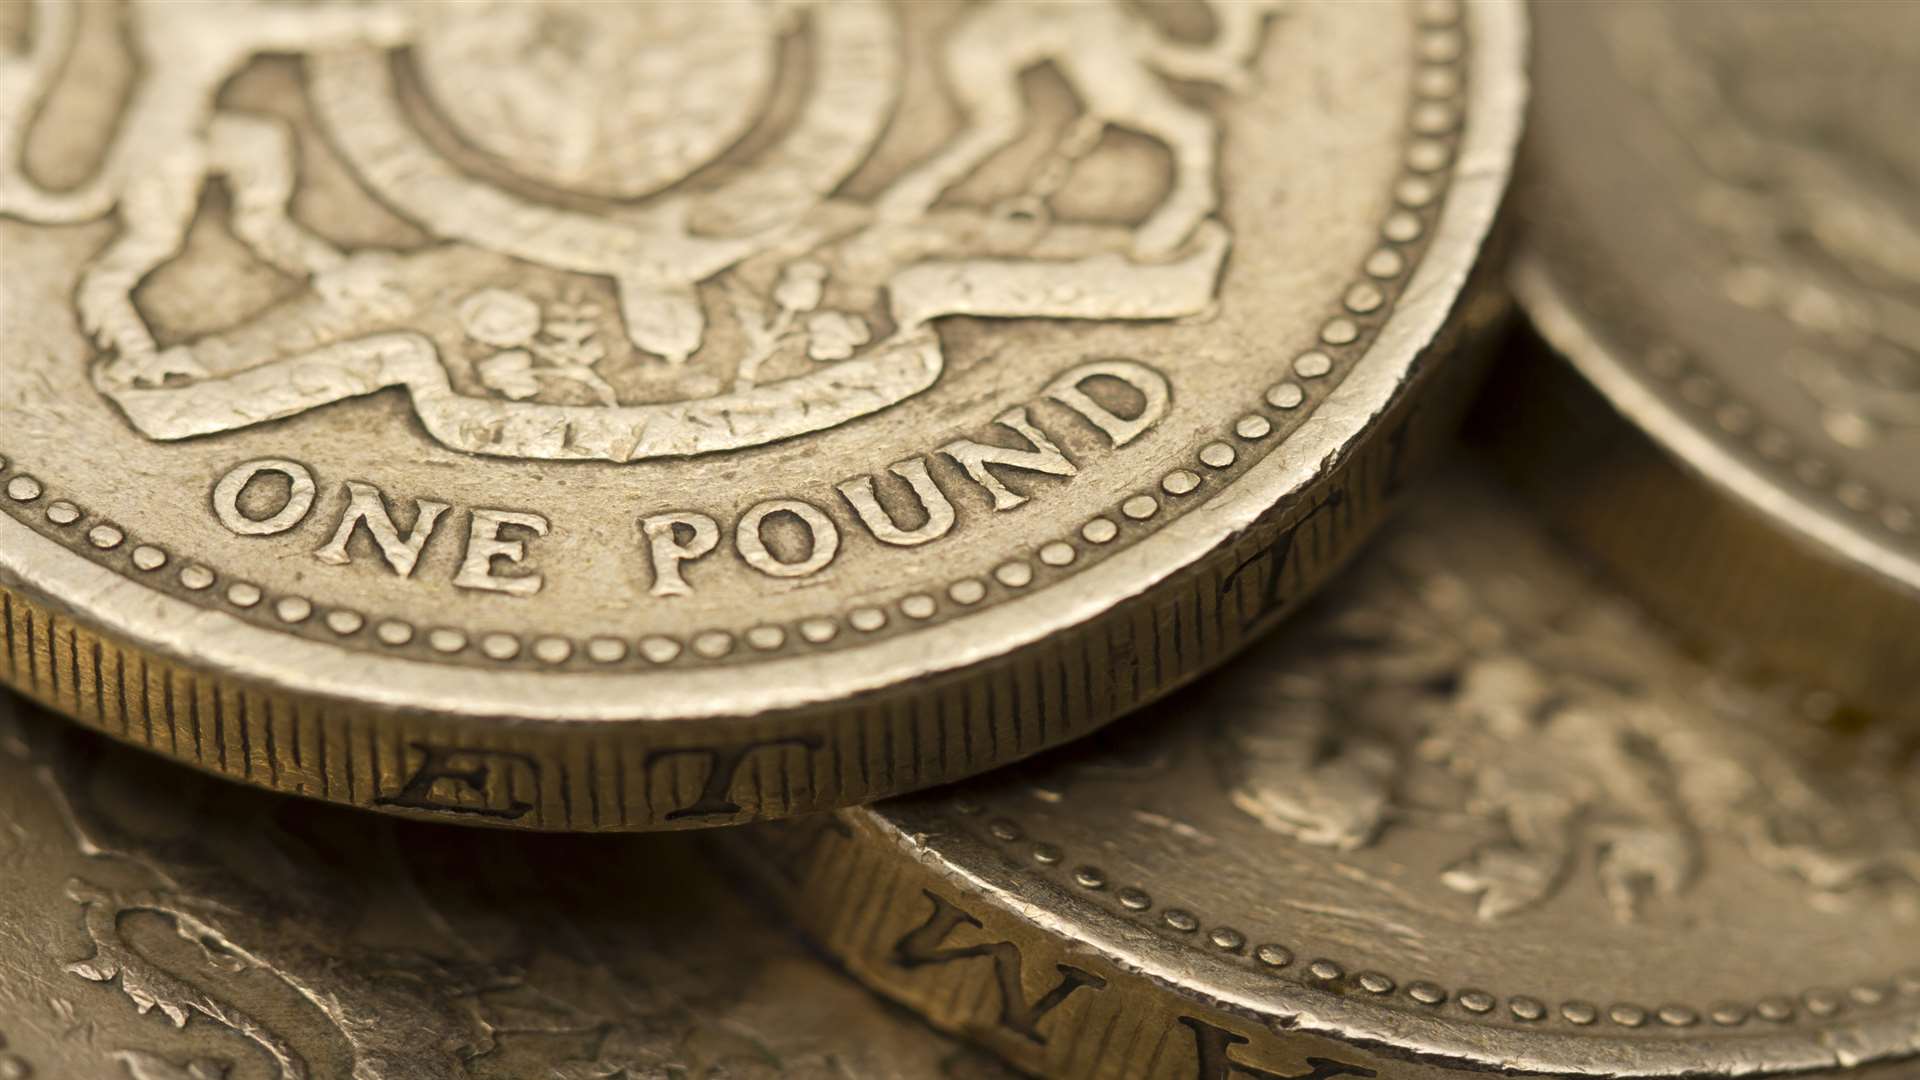 The national living wage will be a challenge for small businesses